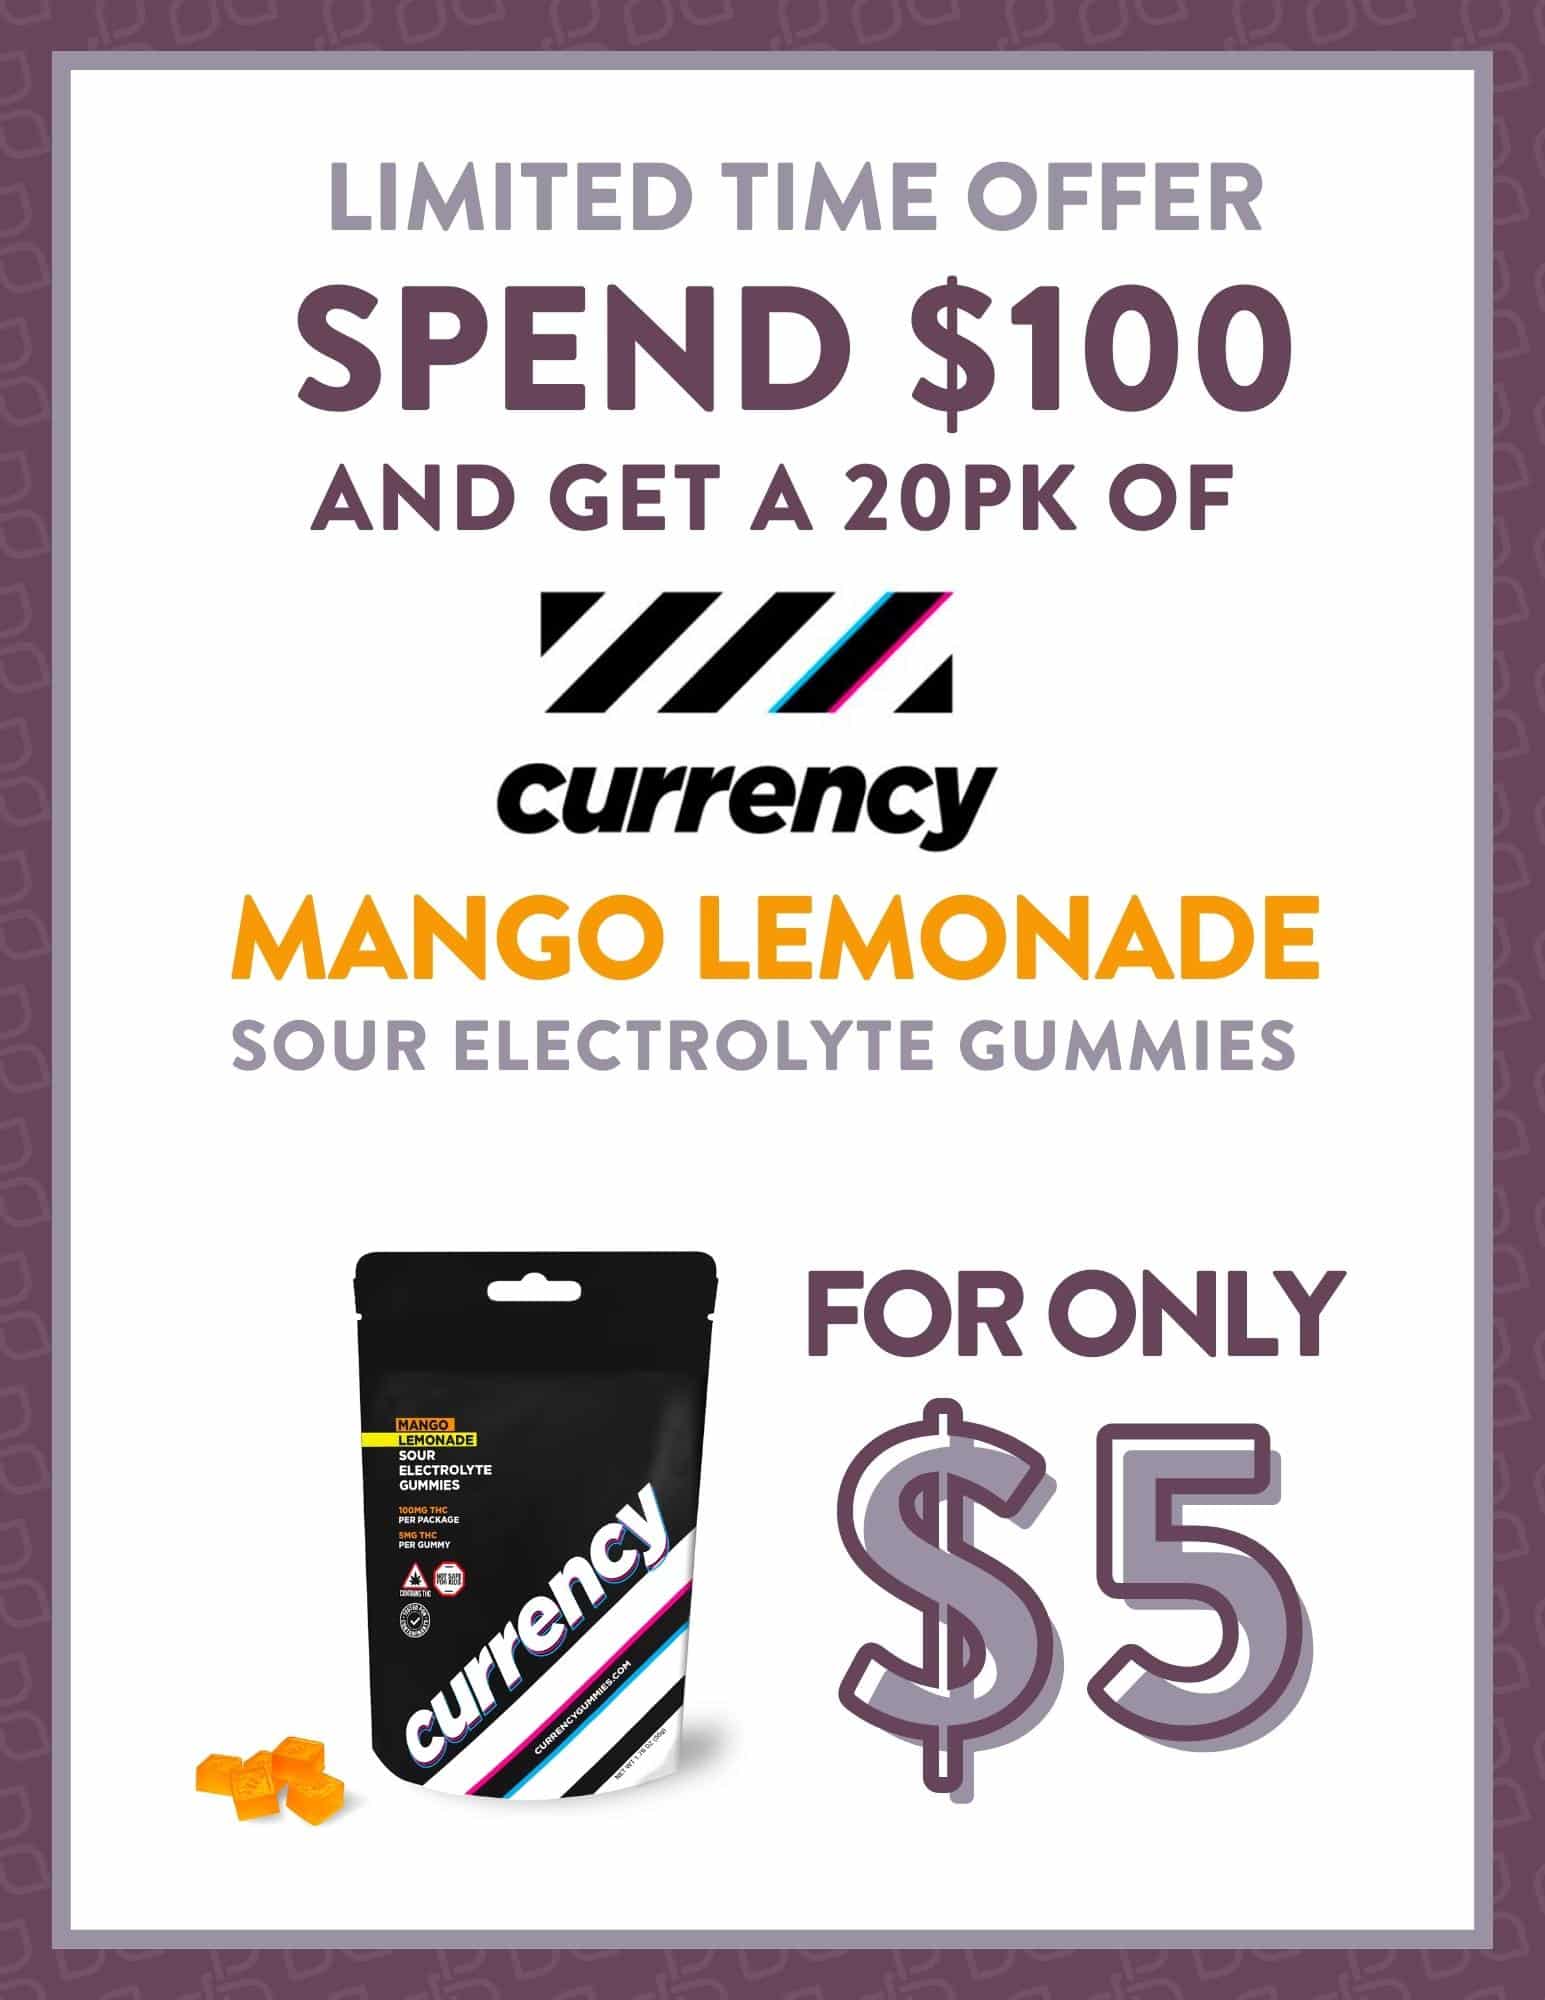 Spend $100 and get Currency Mango Lemonade Gummies for ONLY $5